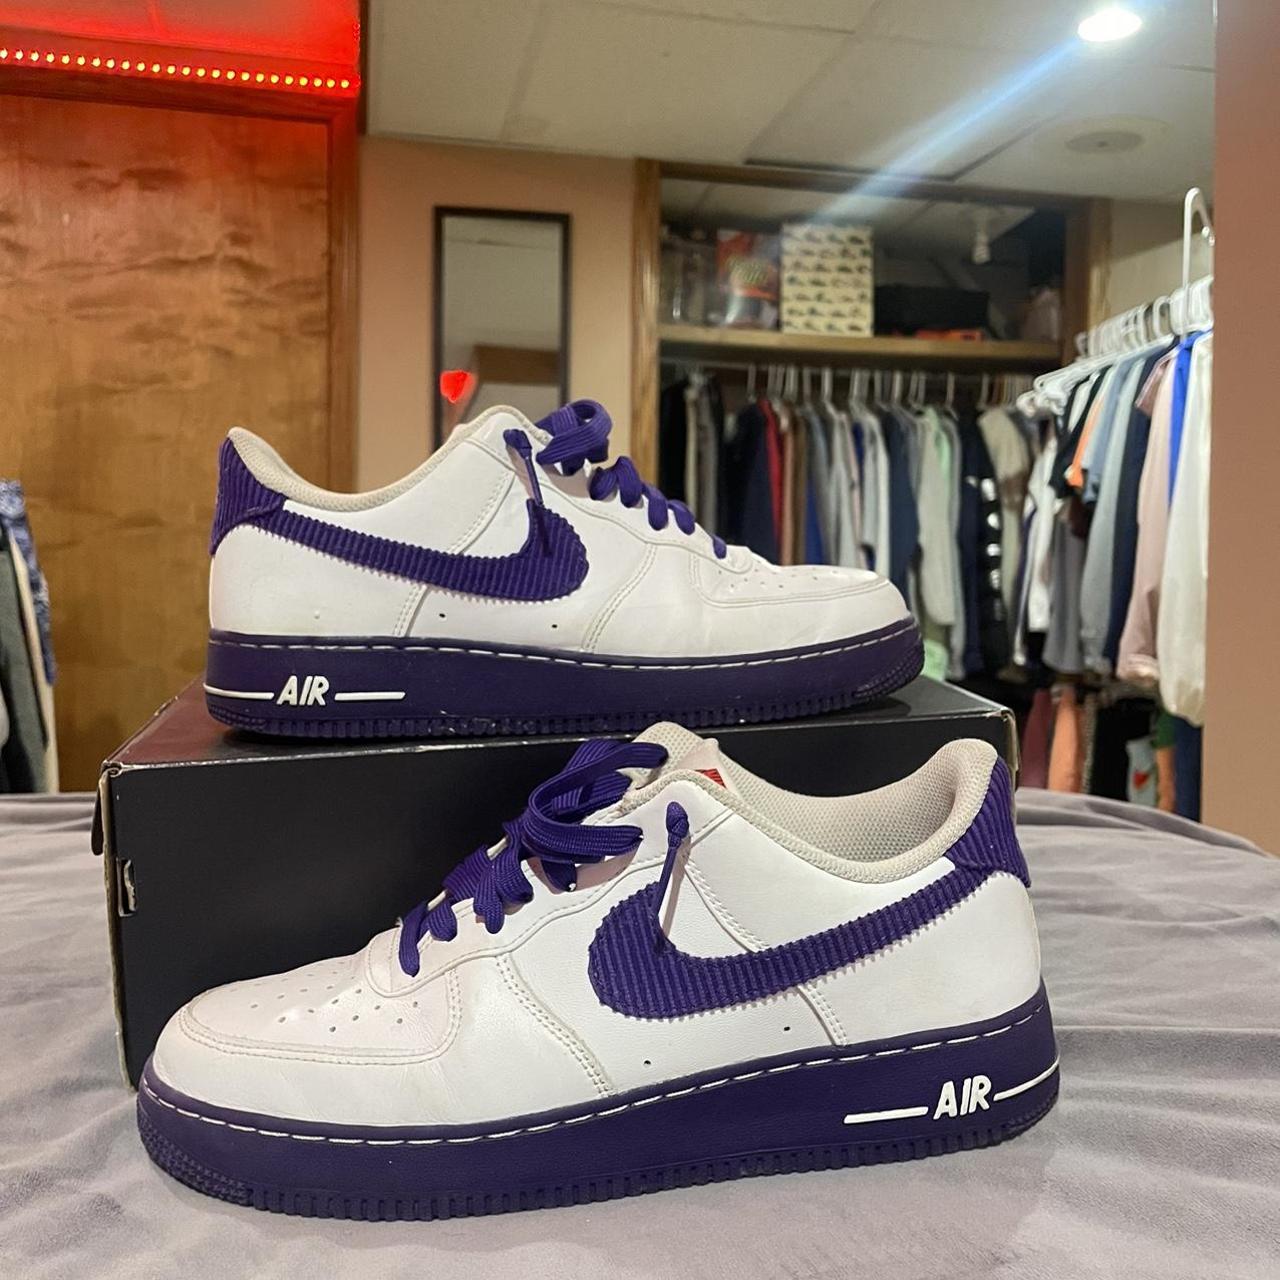 Men's White and Purple Trainers | Depop